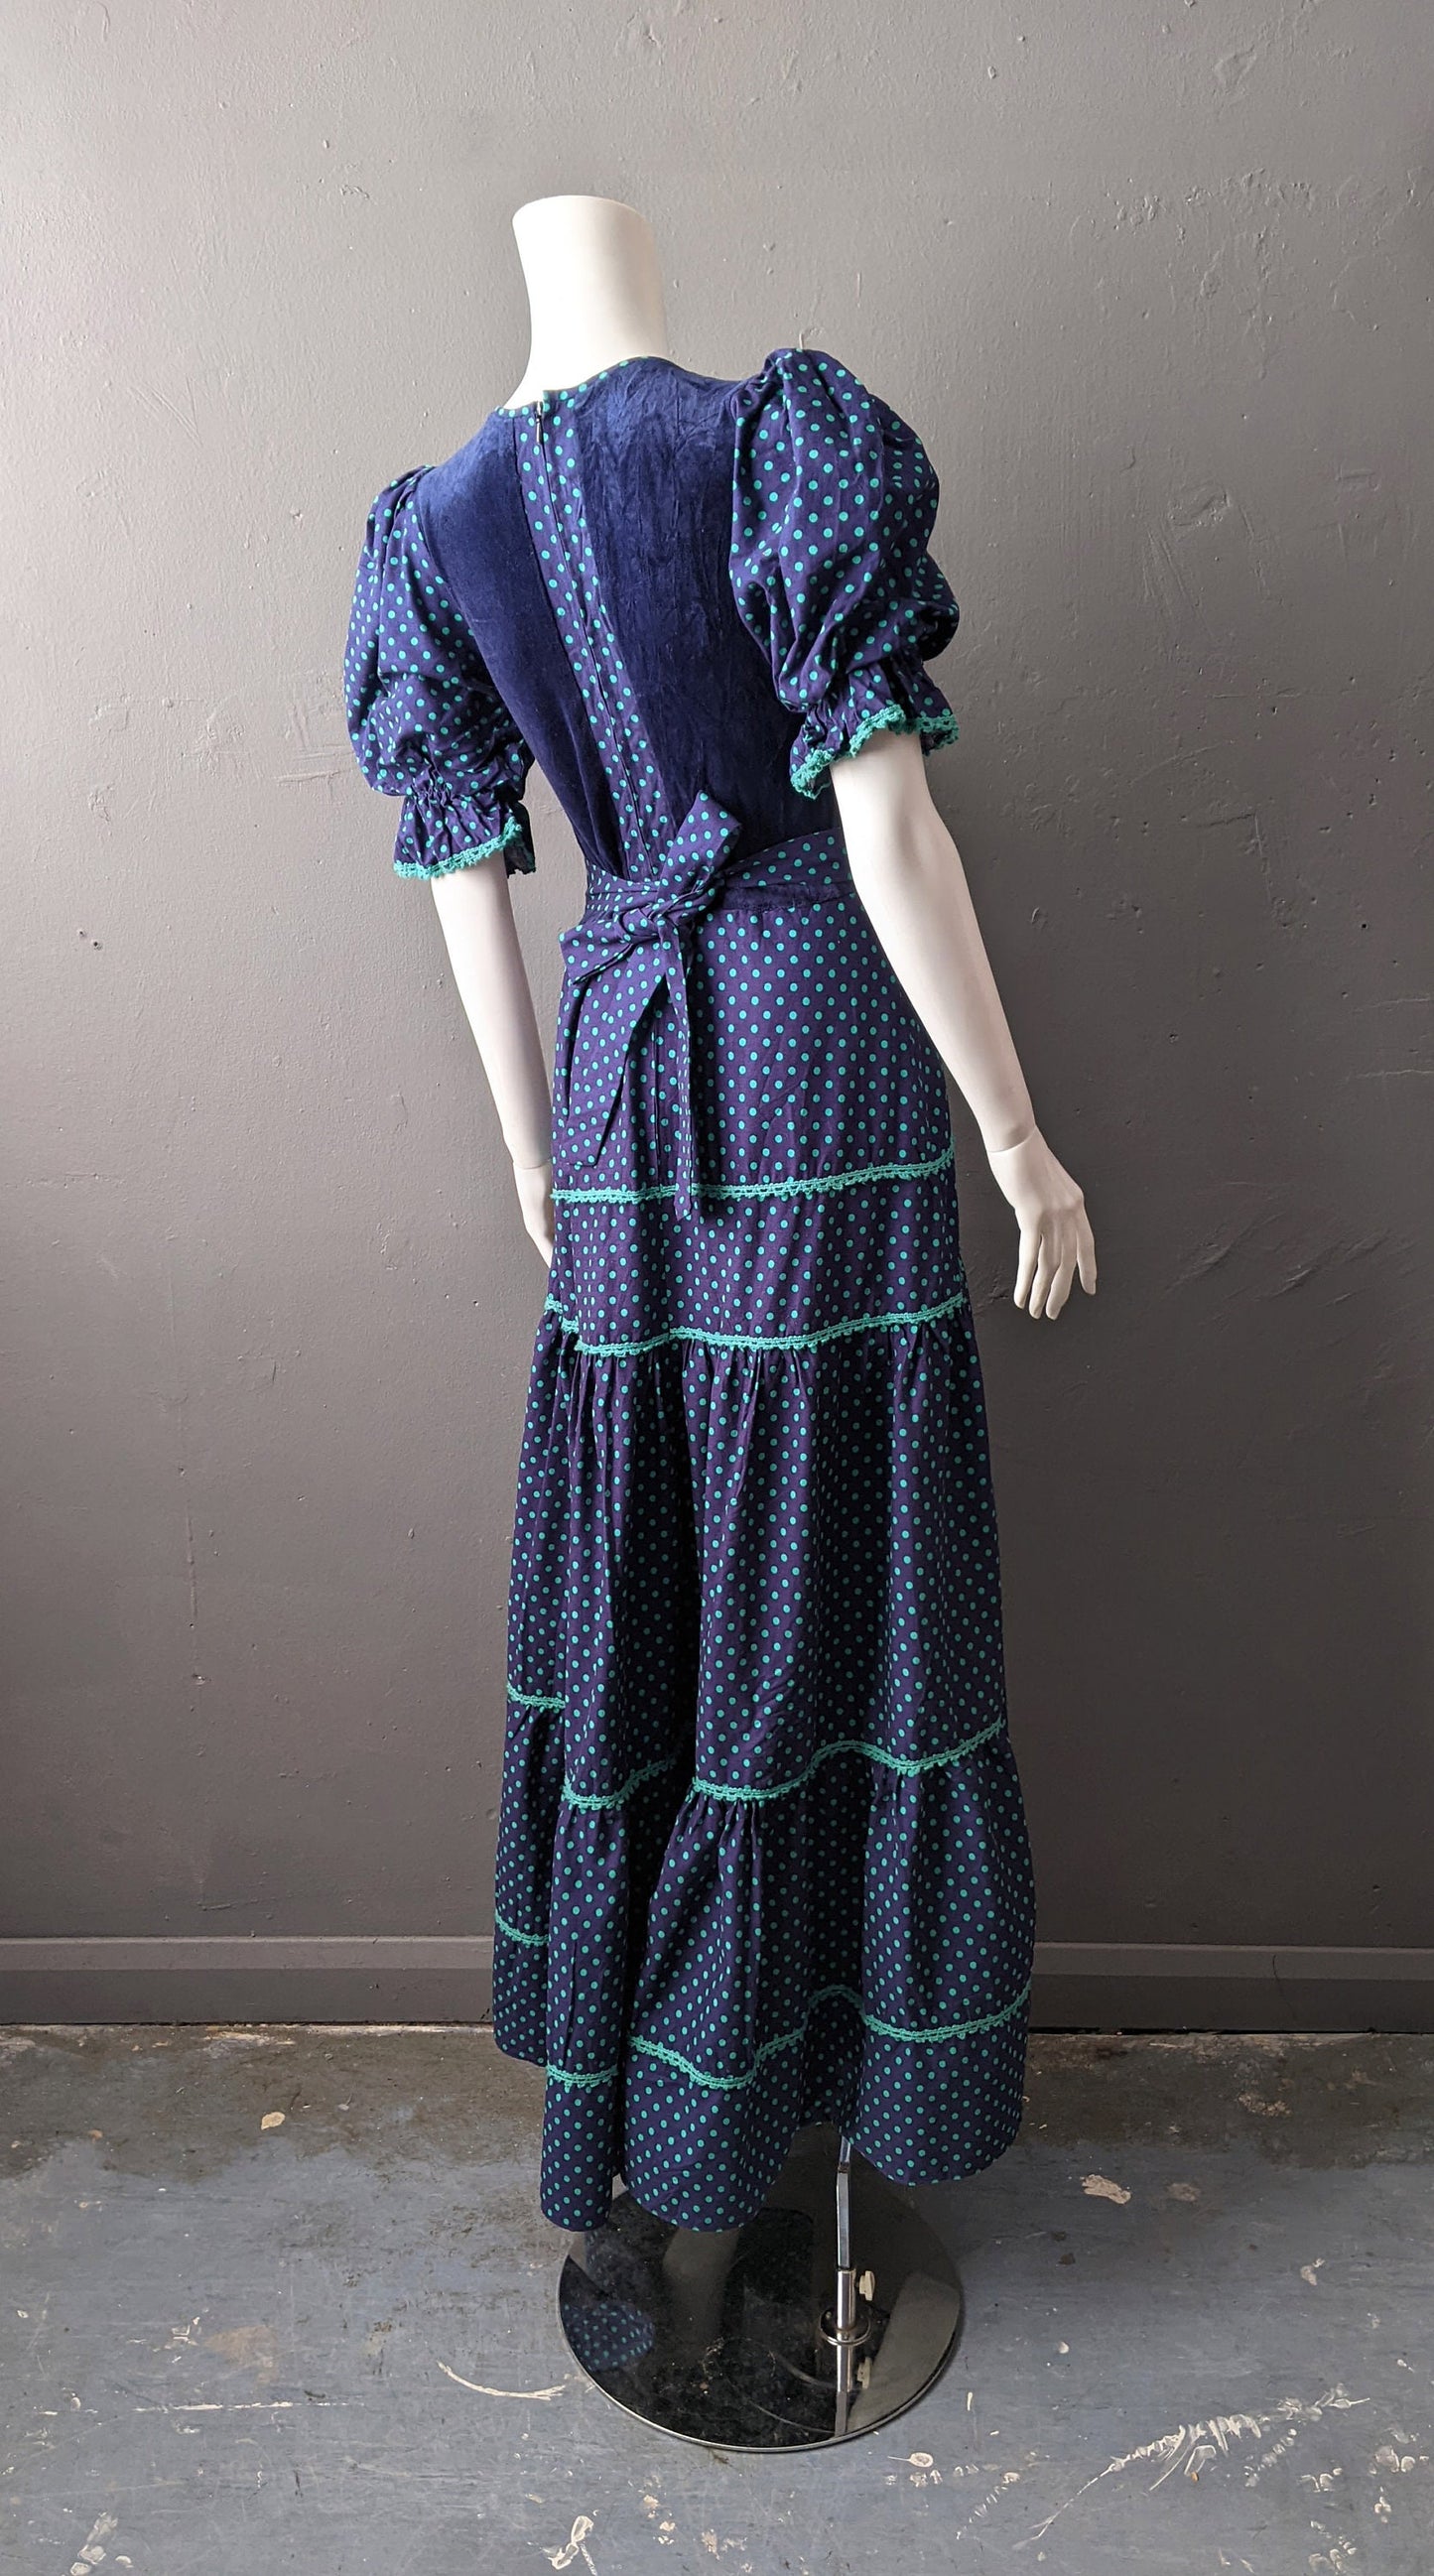 70s Polka Dot Maxi Dress by C&A, Victoriana Prairie Style with Puff Sleeves, Size Small